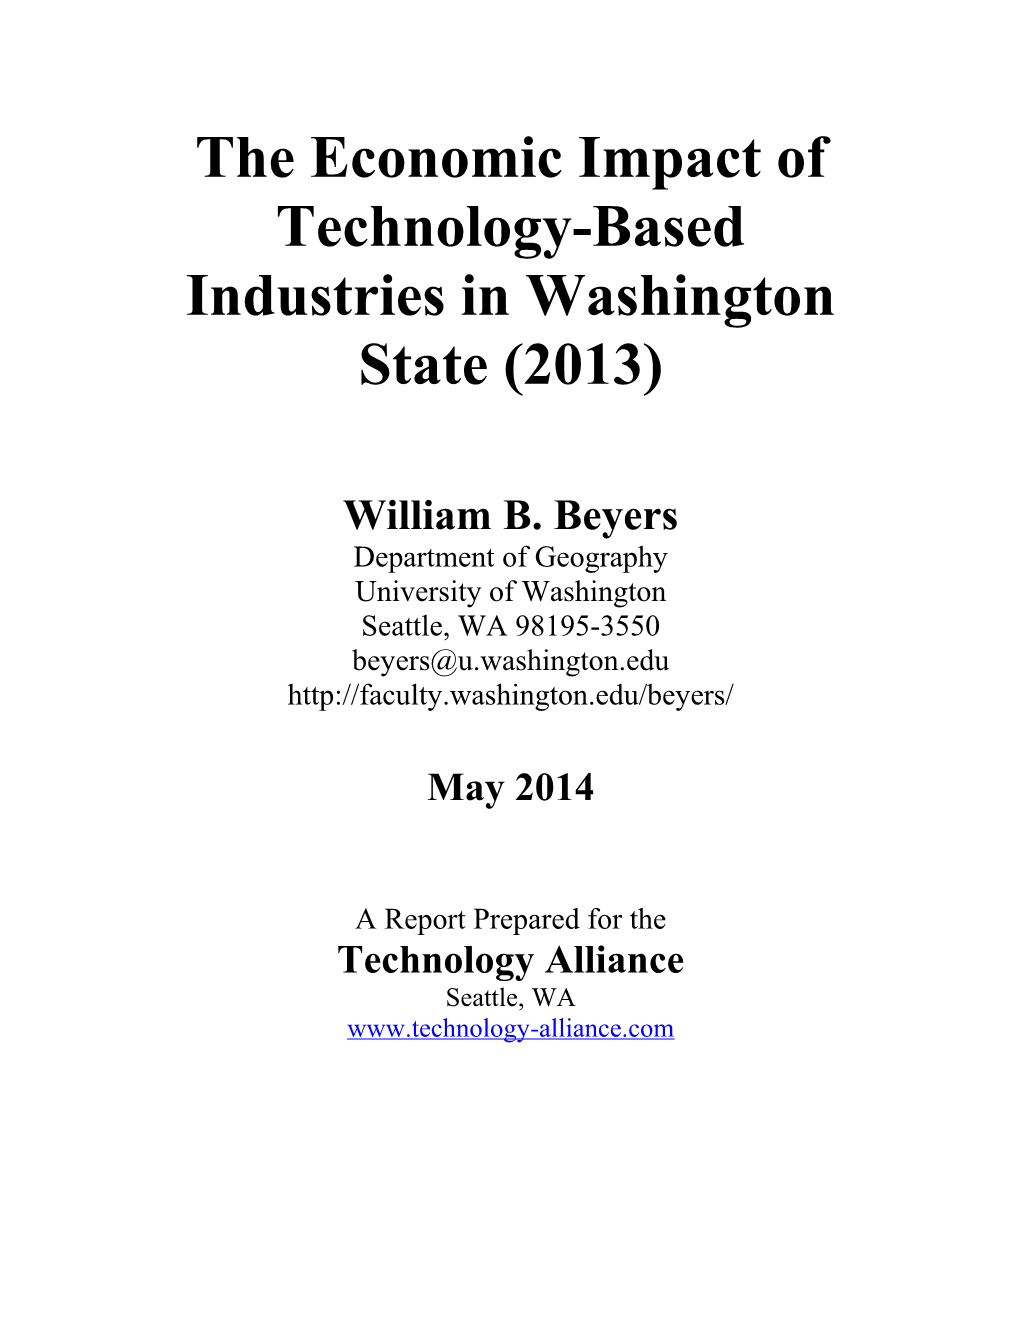 The Economic Impact of Technology-Based Industries in Washington State